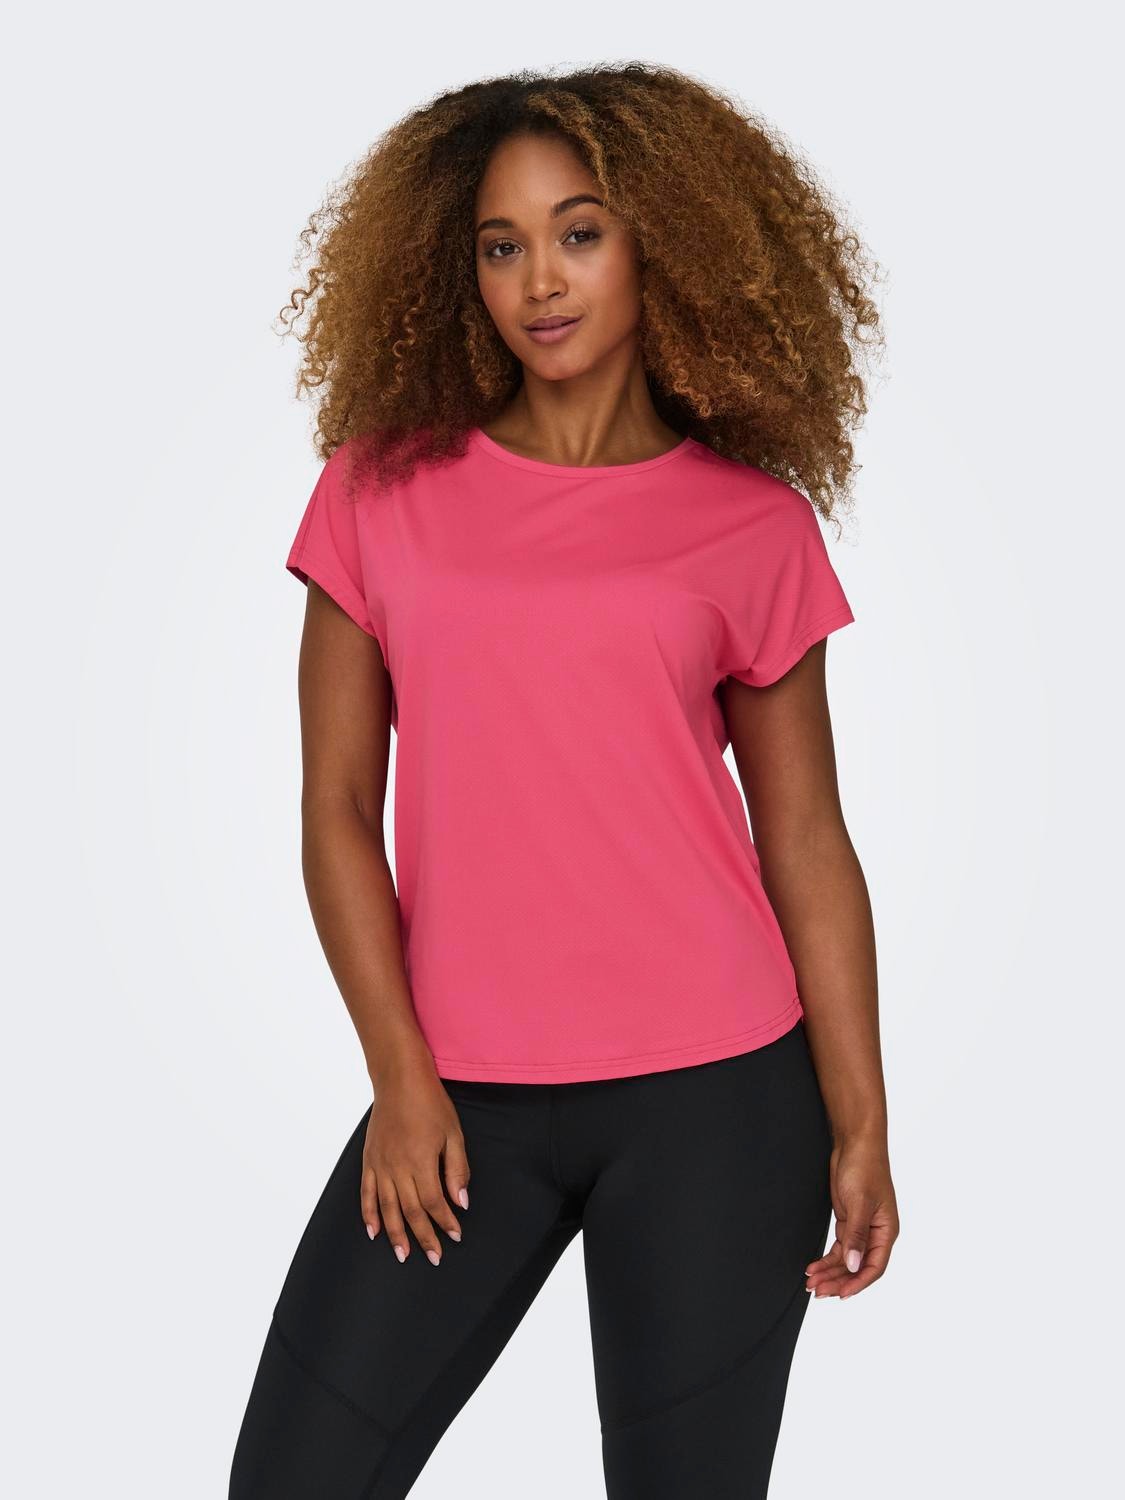 ONLY Loose fit O-hals Vleermuismouwen T-shirts -Raspberry Sorbet - 15311799